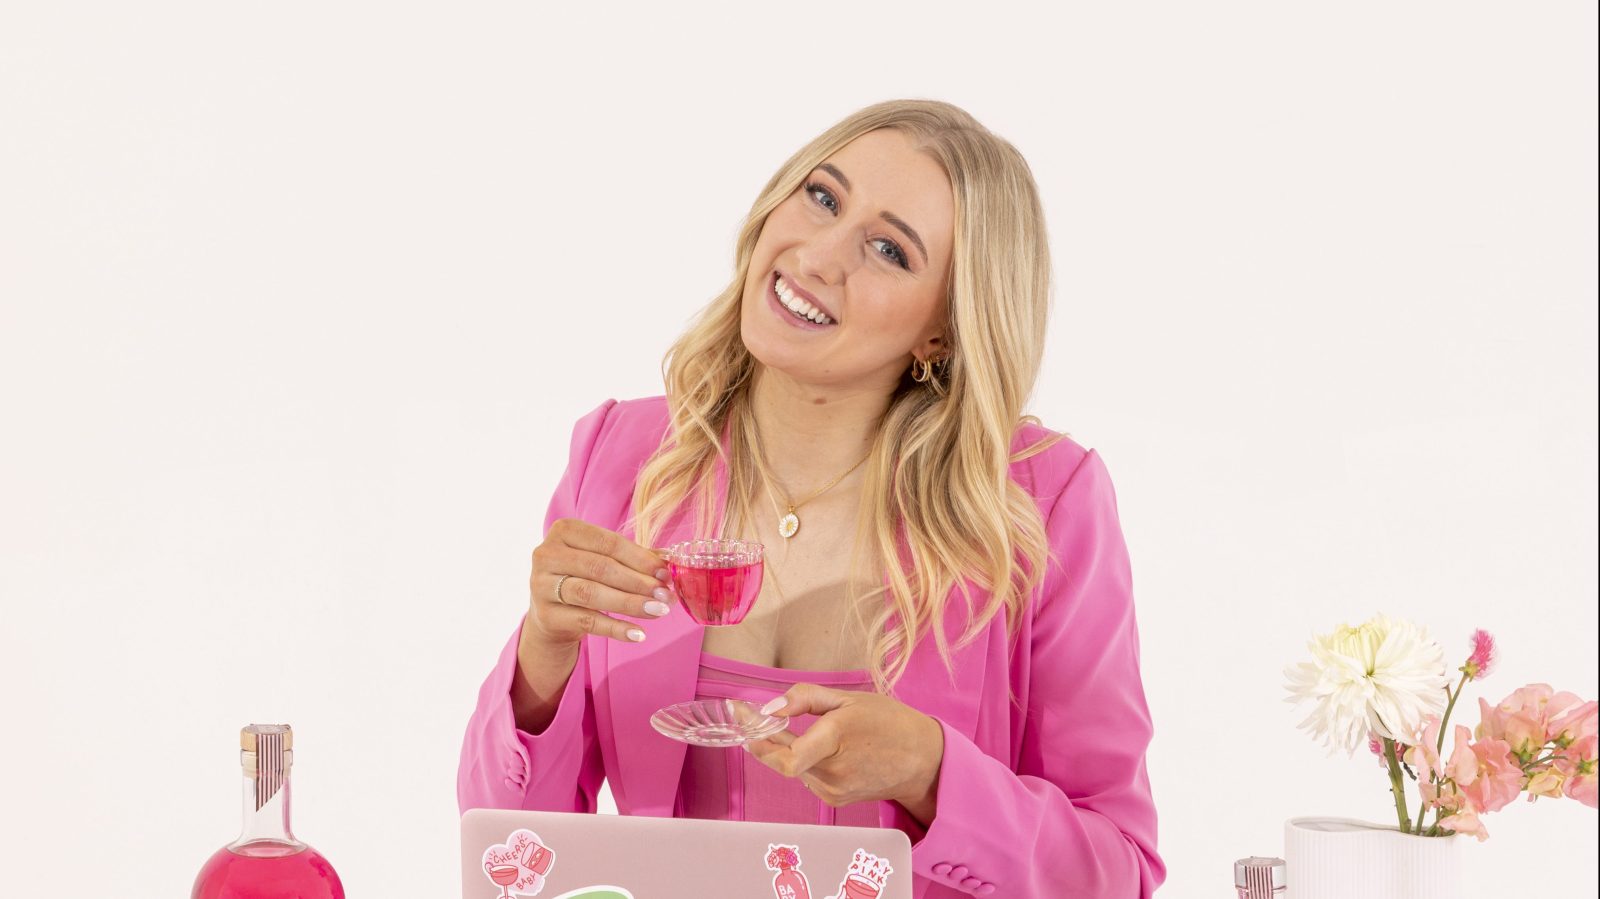 BABY Pink Gin founder Ellen Weigall with a cup, seated